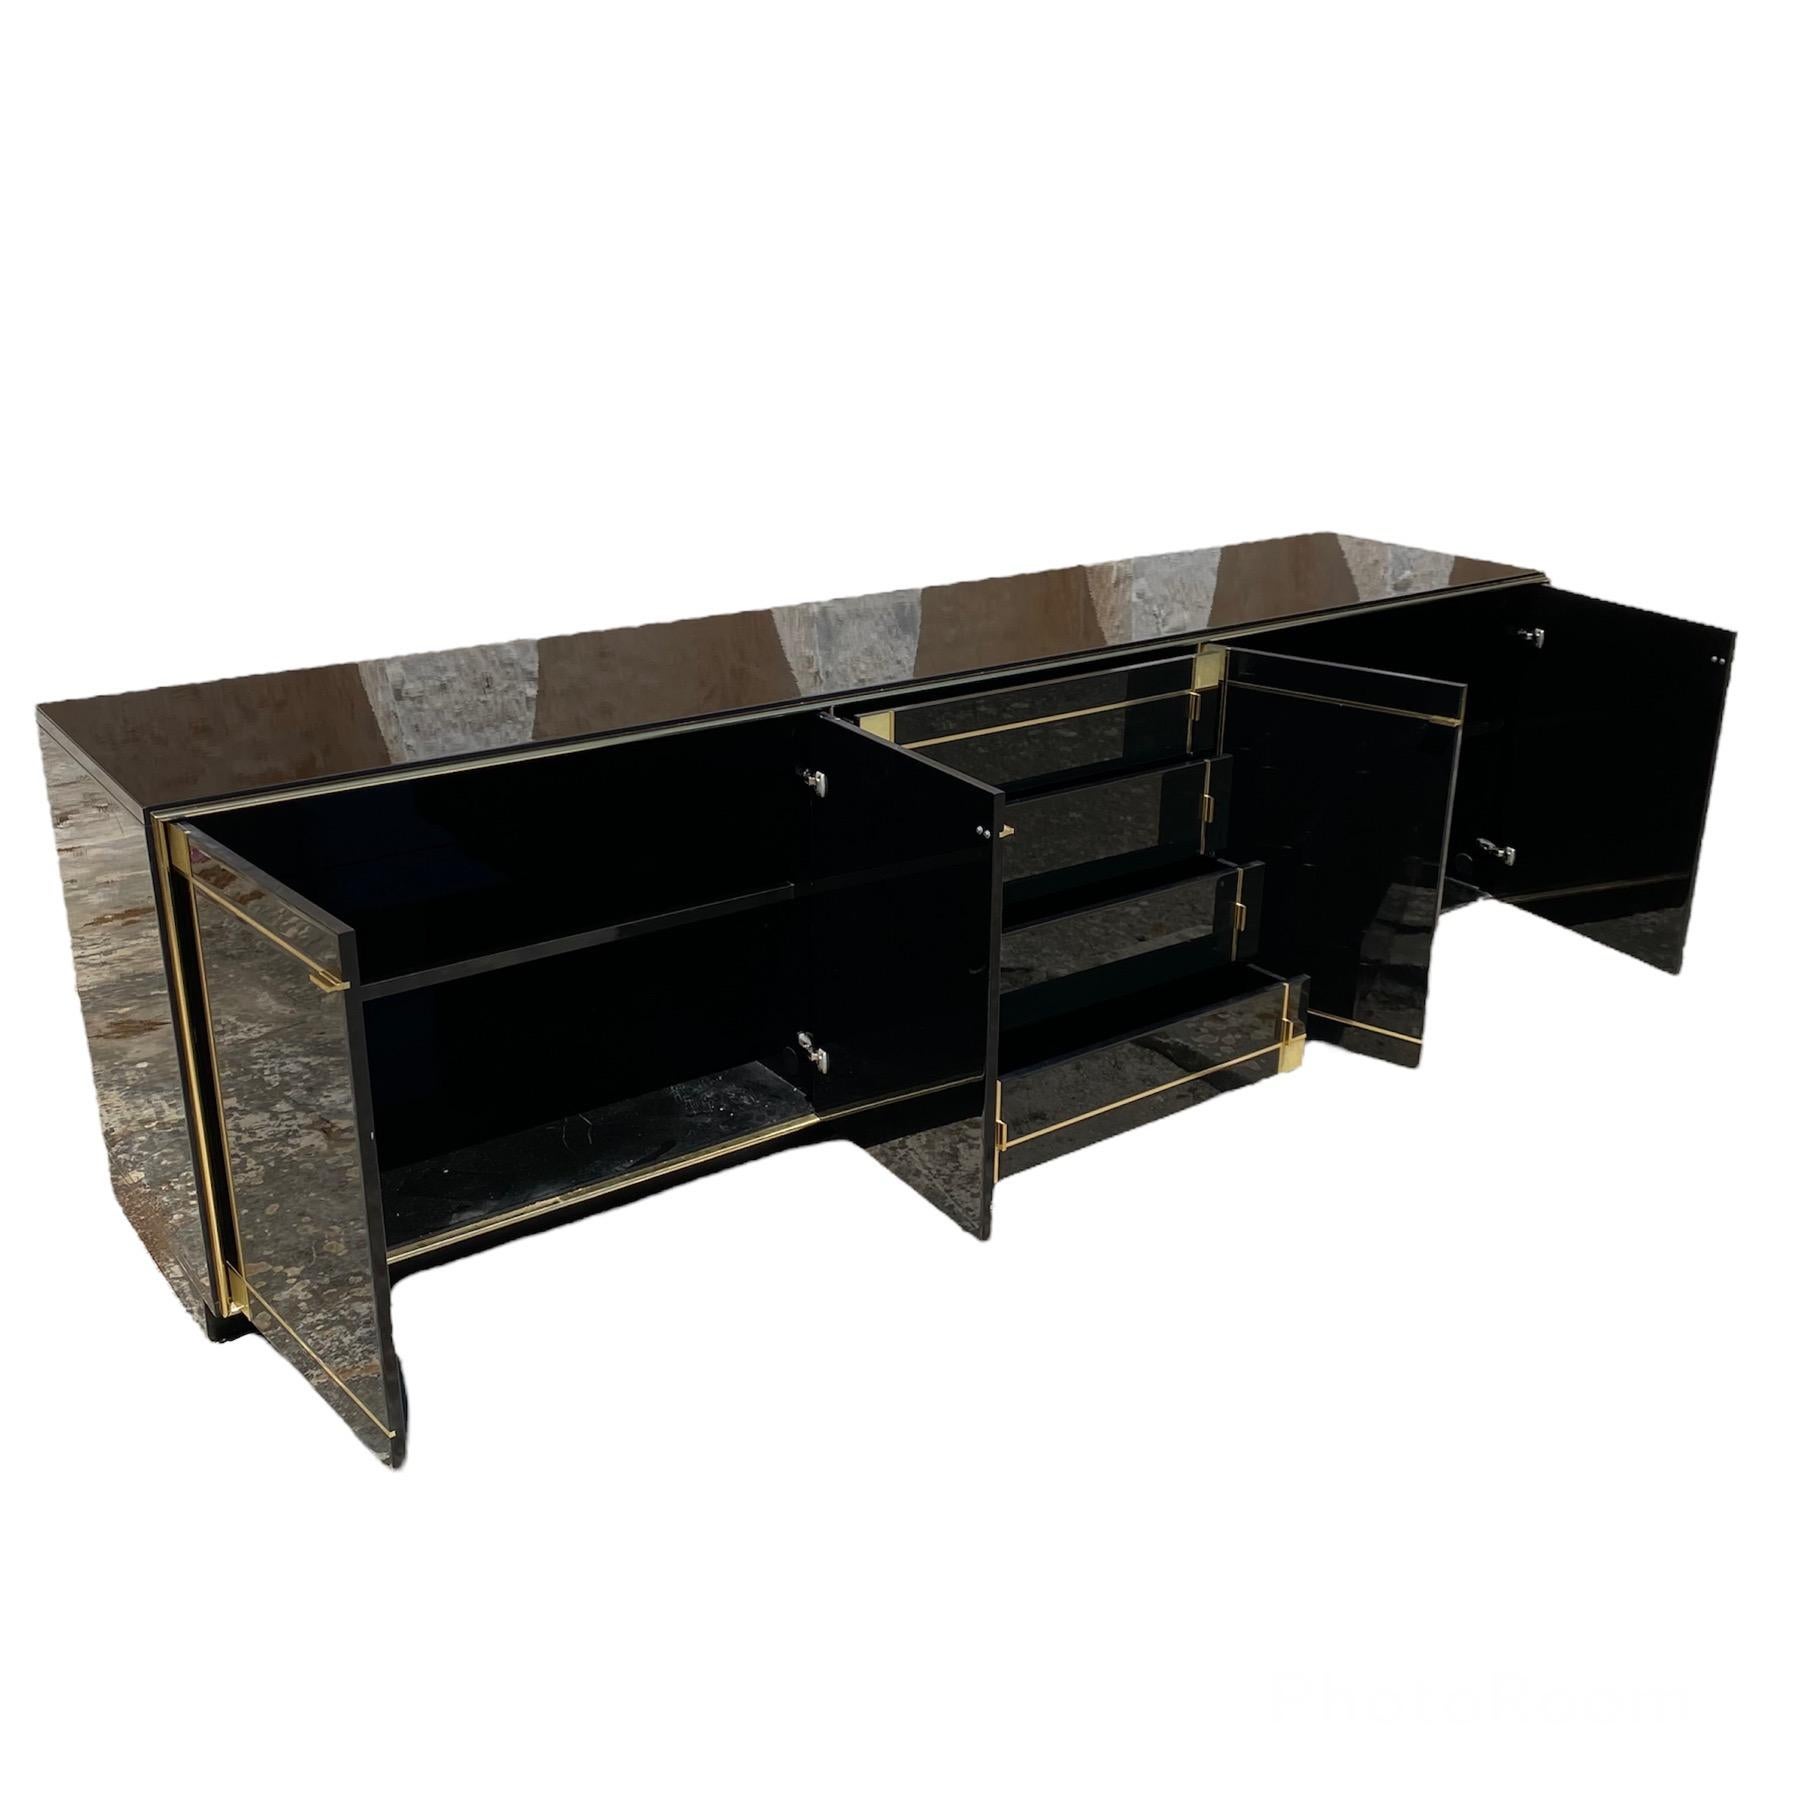 Late 20th Century Pierre Cardin Black Lacquered Sideboard for Roche Bobois For Sale